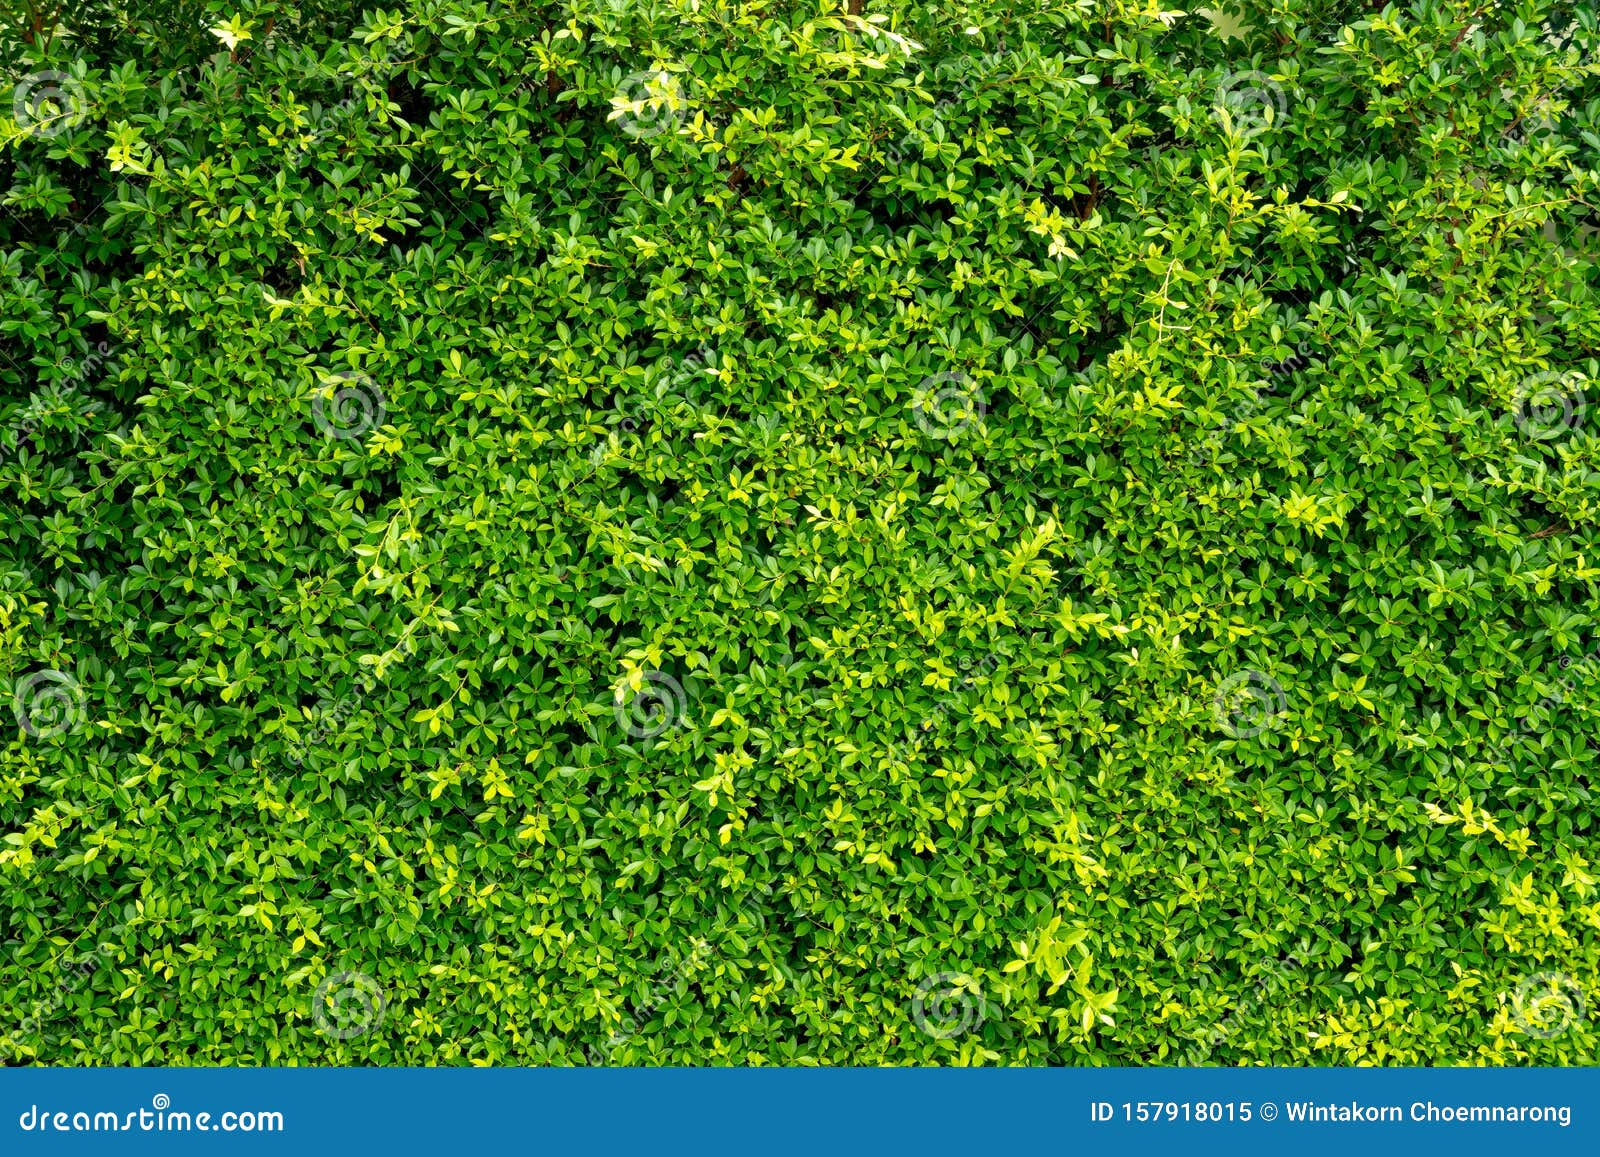 Small Green Leaves Texture Background Stock Image - Image of light,  environment: 157918015